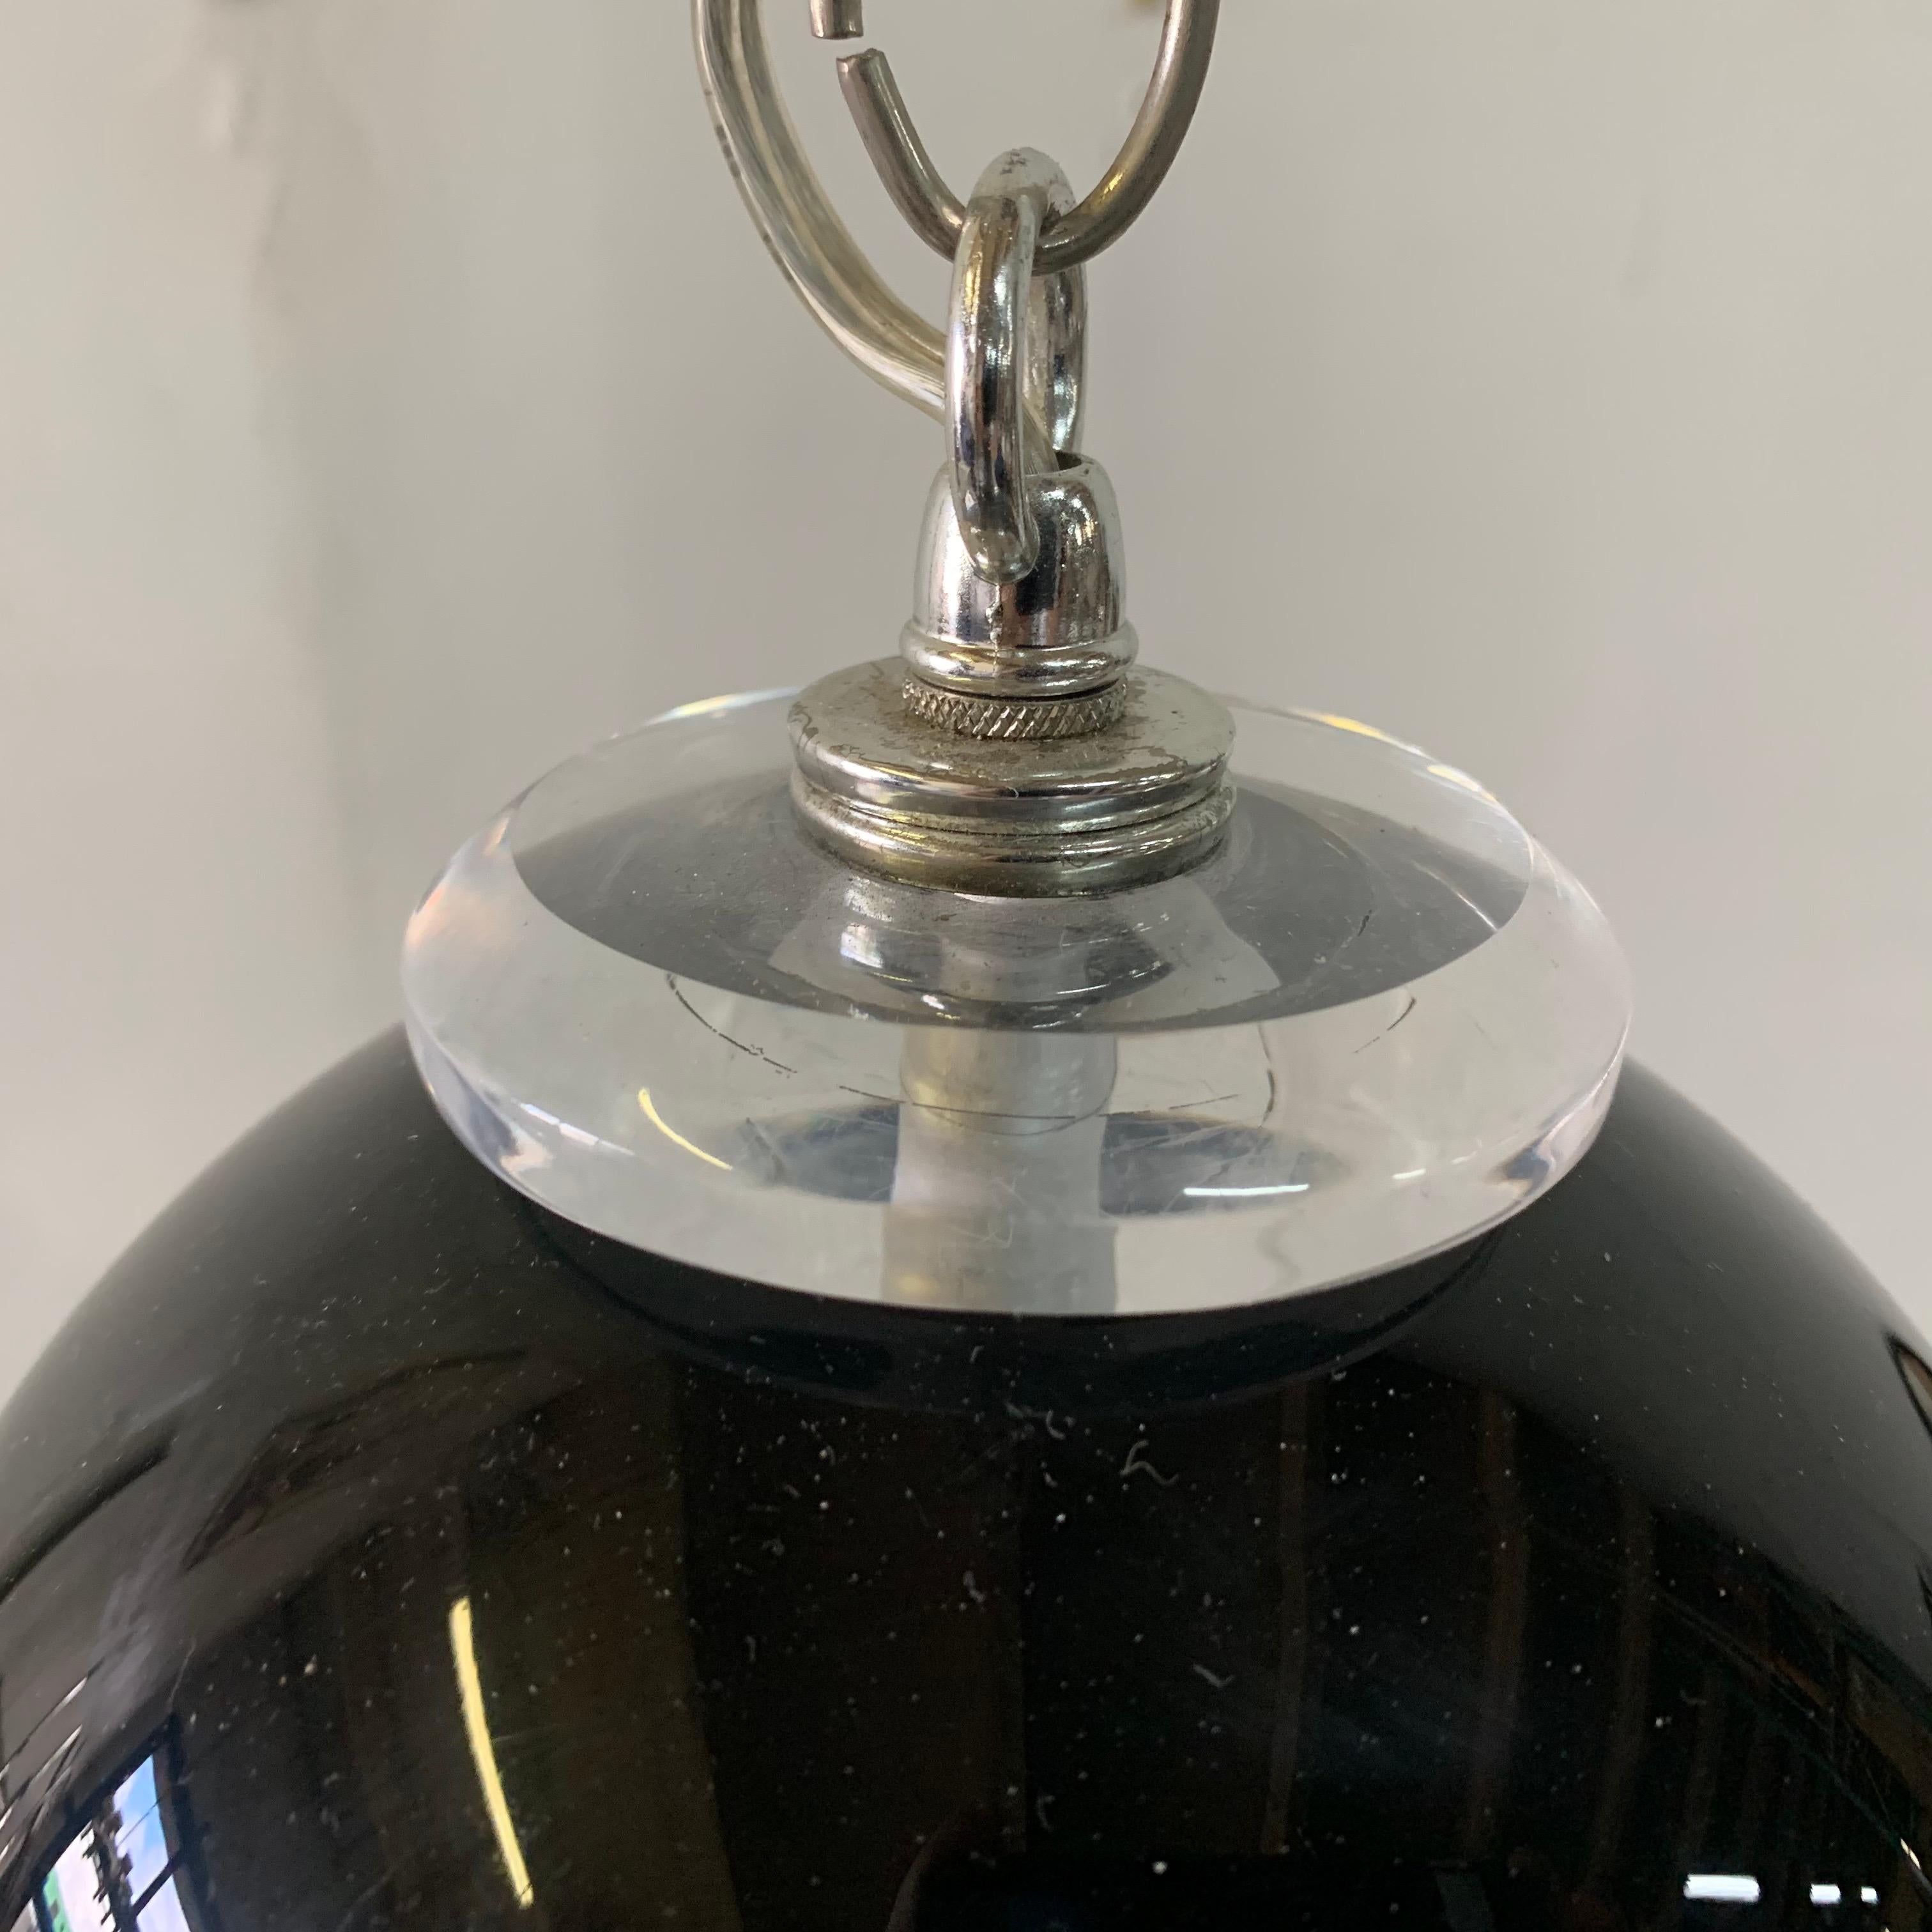 Black Murano glass with a subtle red line at the base of the dome shaped pendant light. Single bulb to interior and topped with an acrylic finial (see detail images). Gives a wonderful bright light to spot down.